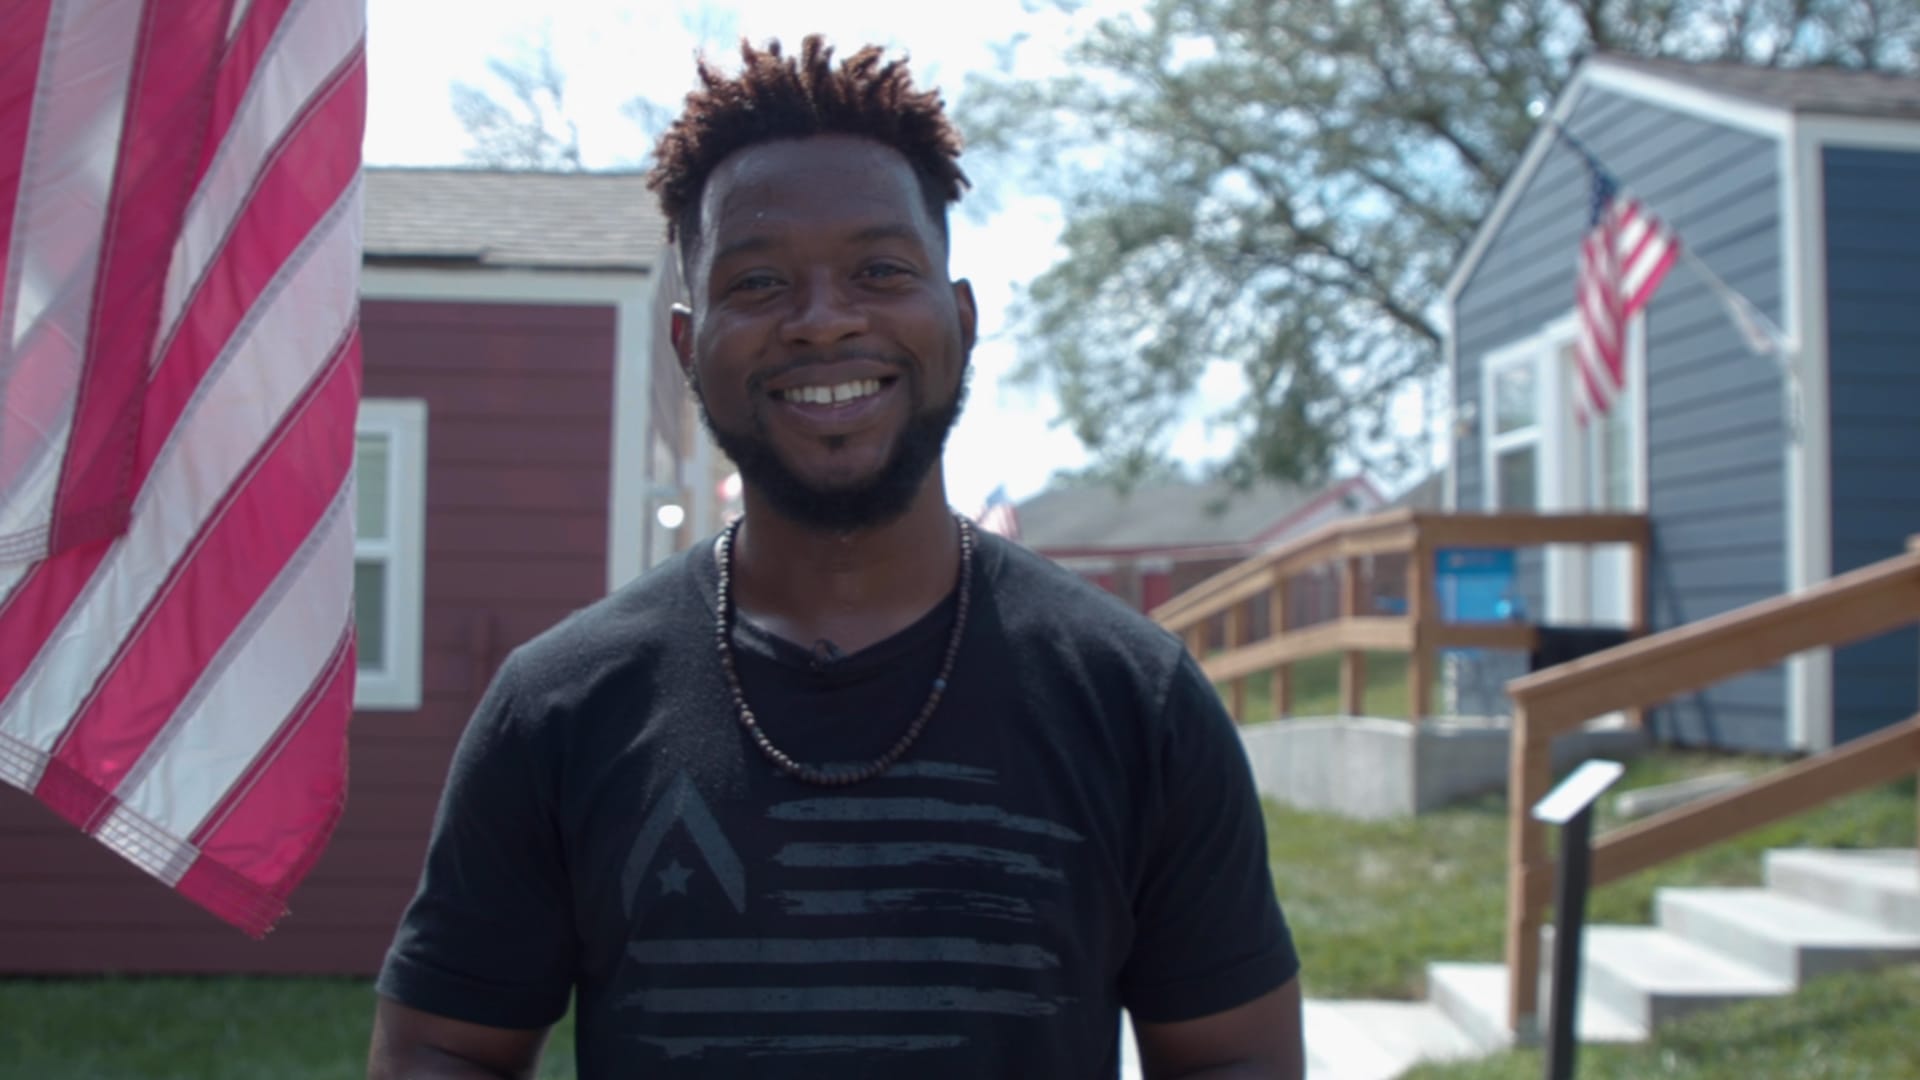 curiousKC | Tiny Homes Offer Path Out of Homelessness